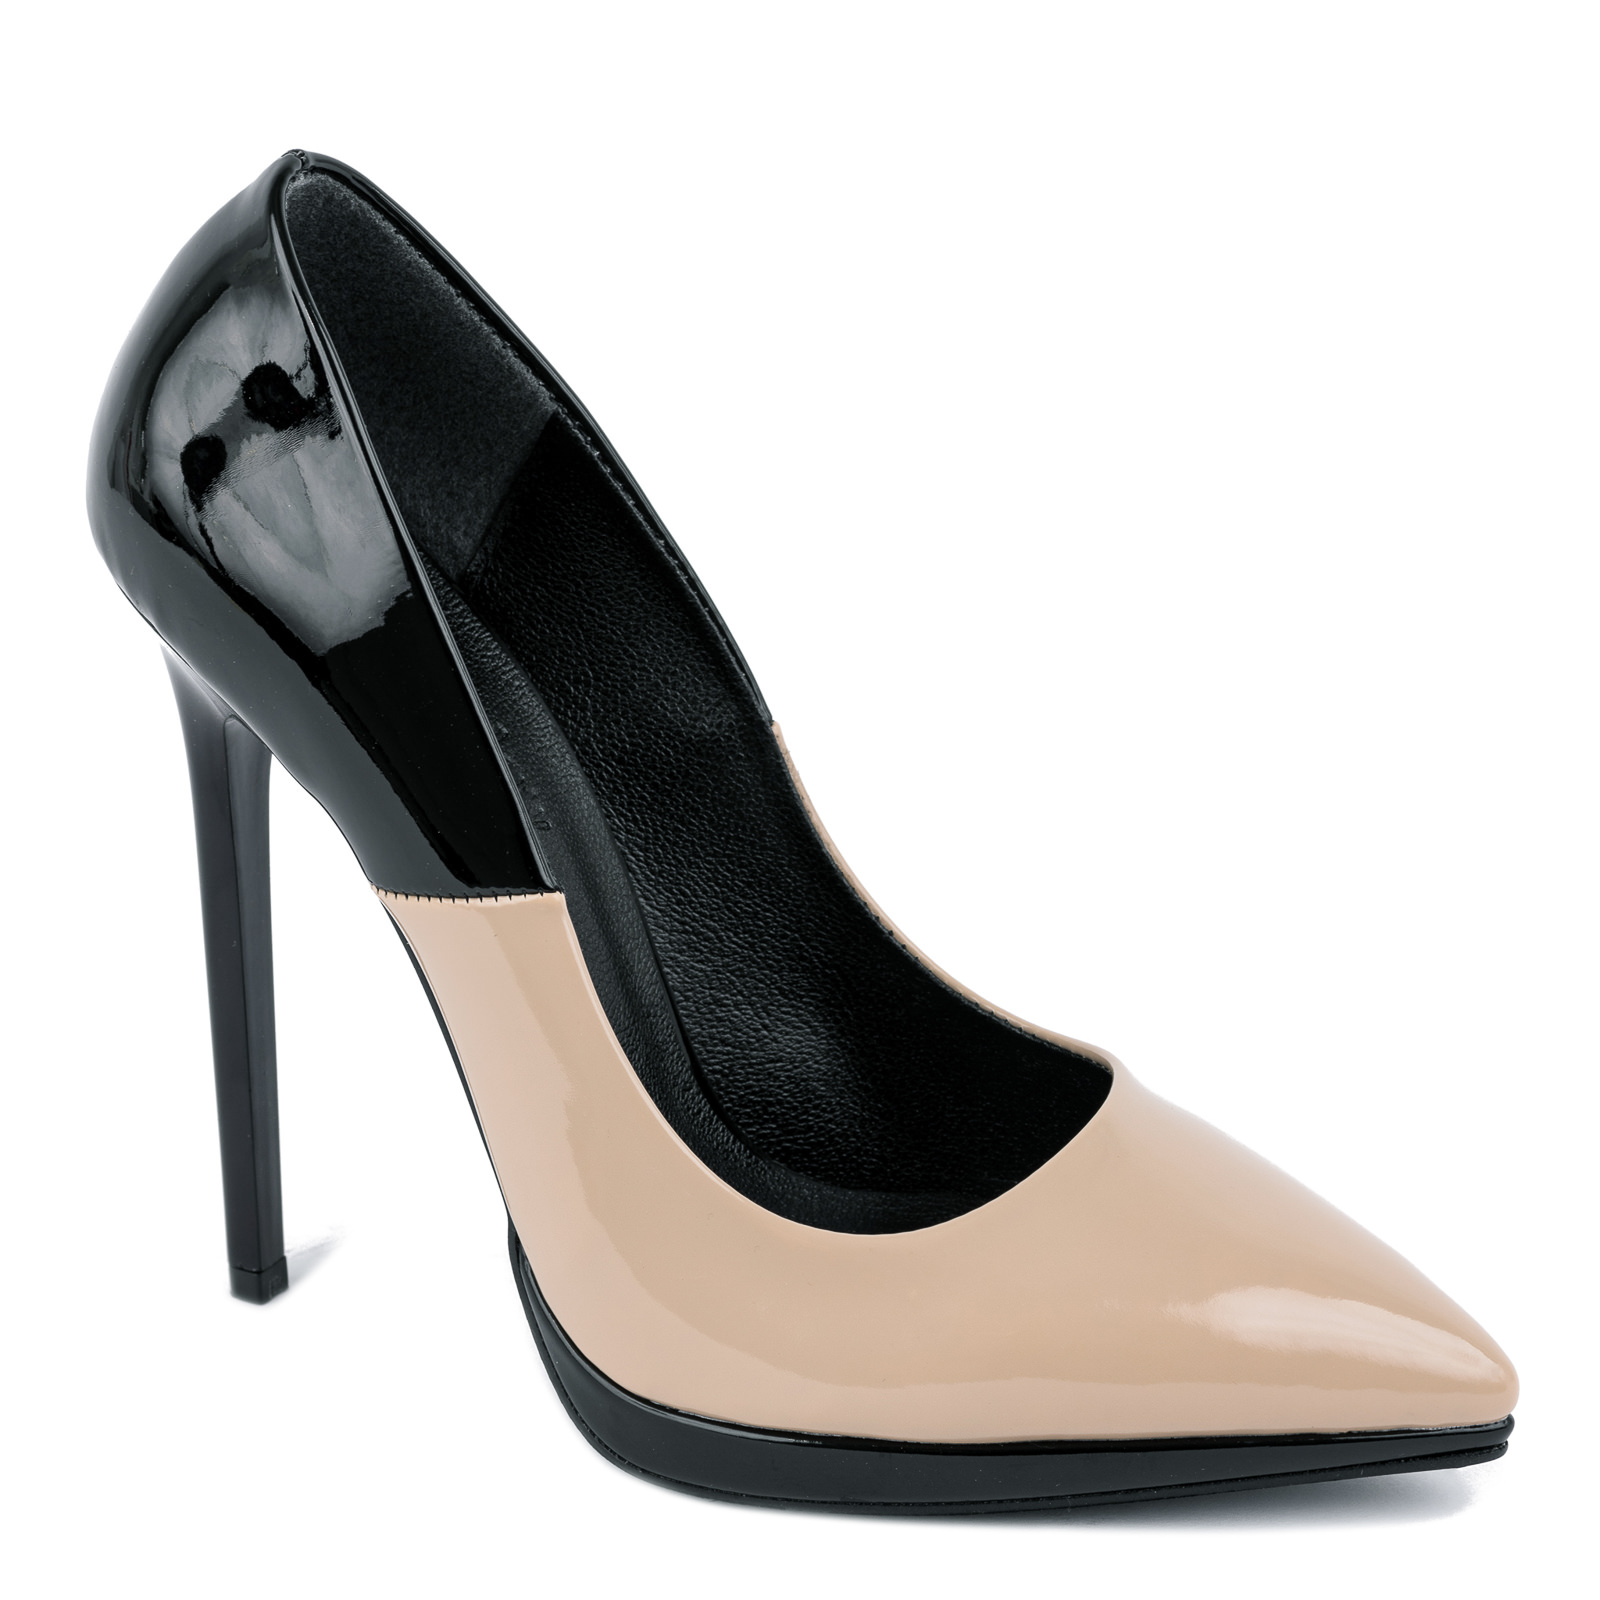 POINTED STILETTO SHOES WITH THIN HEEL - BLACK/BEIGE